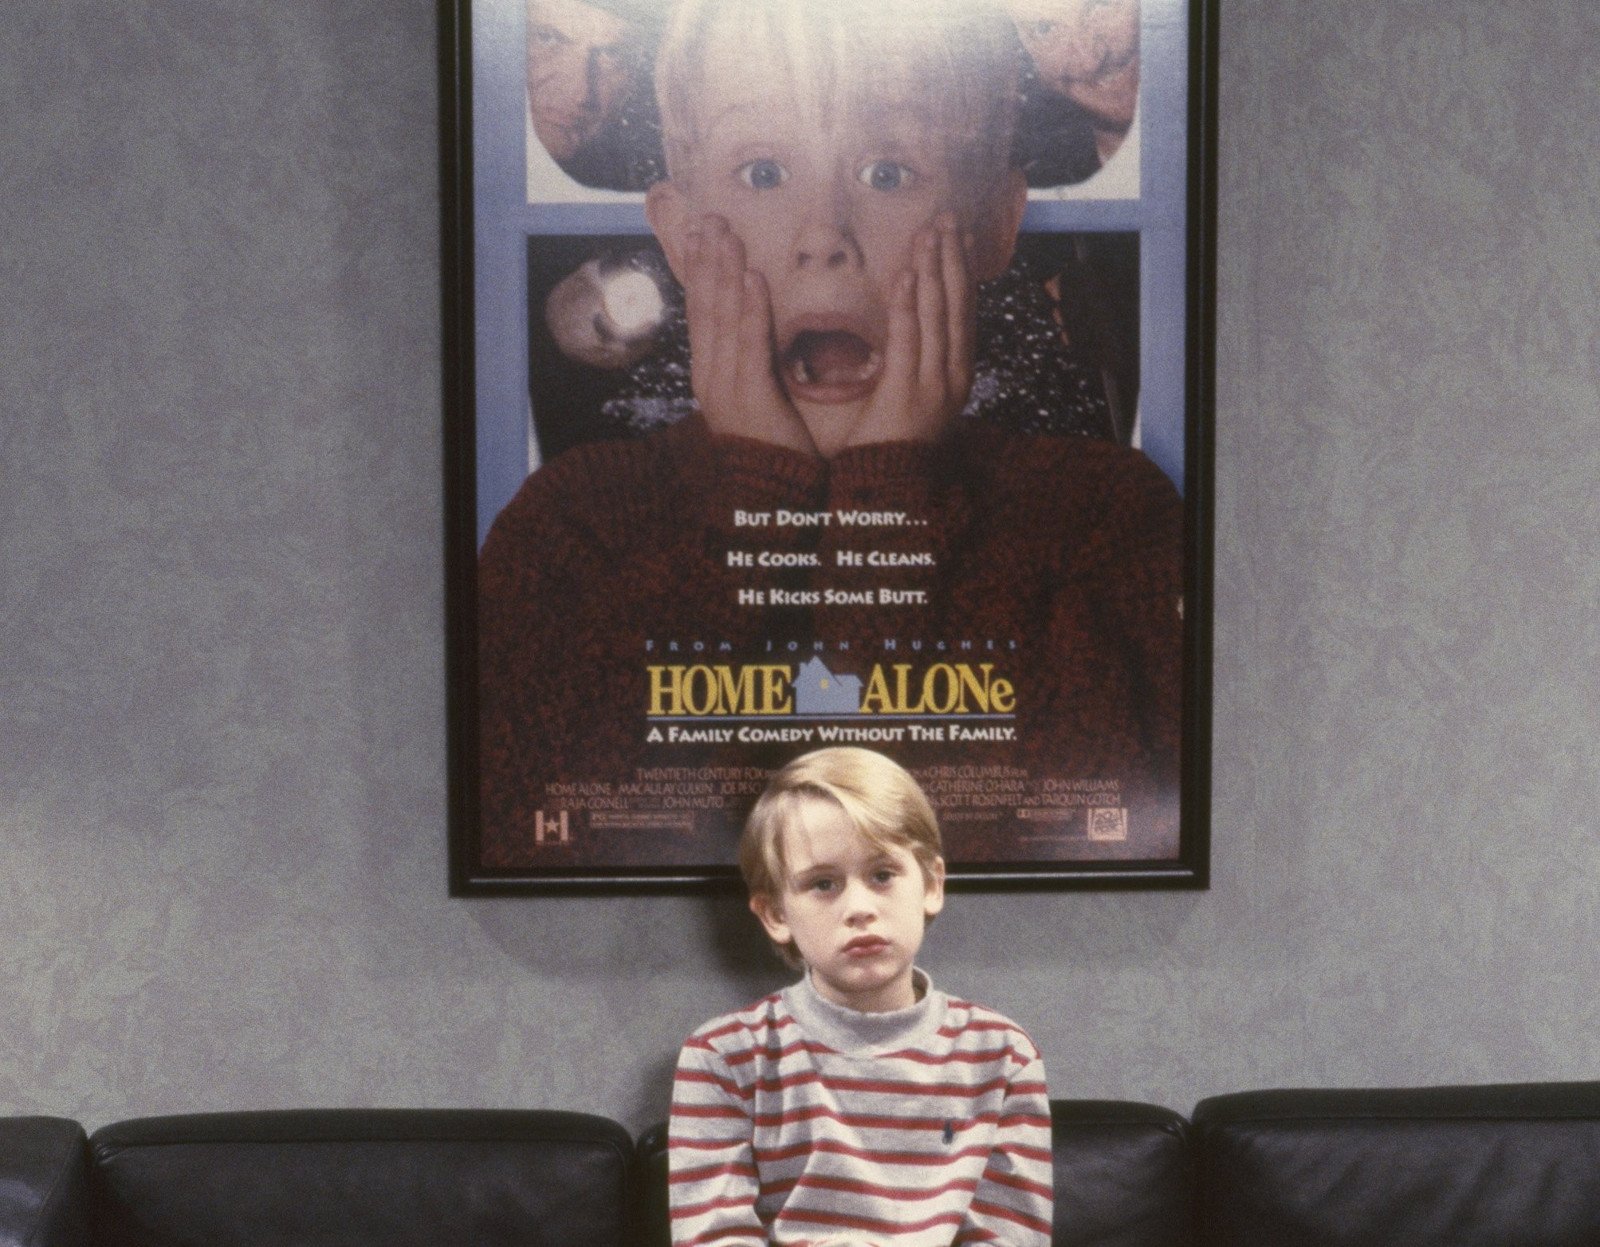 Macaulay Culkin sitting in front of a 'Home Alone' poster for our article about where to stream the movies. He's wearing a white and red striped shirt and frowning at the camera.